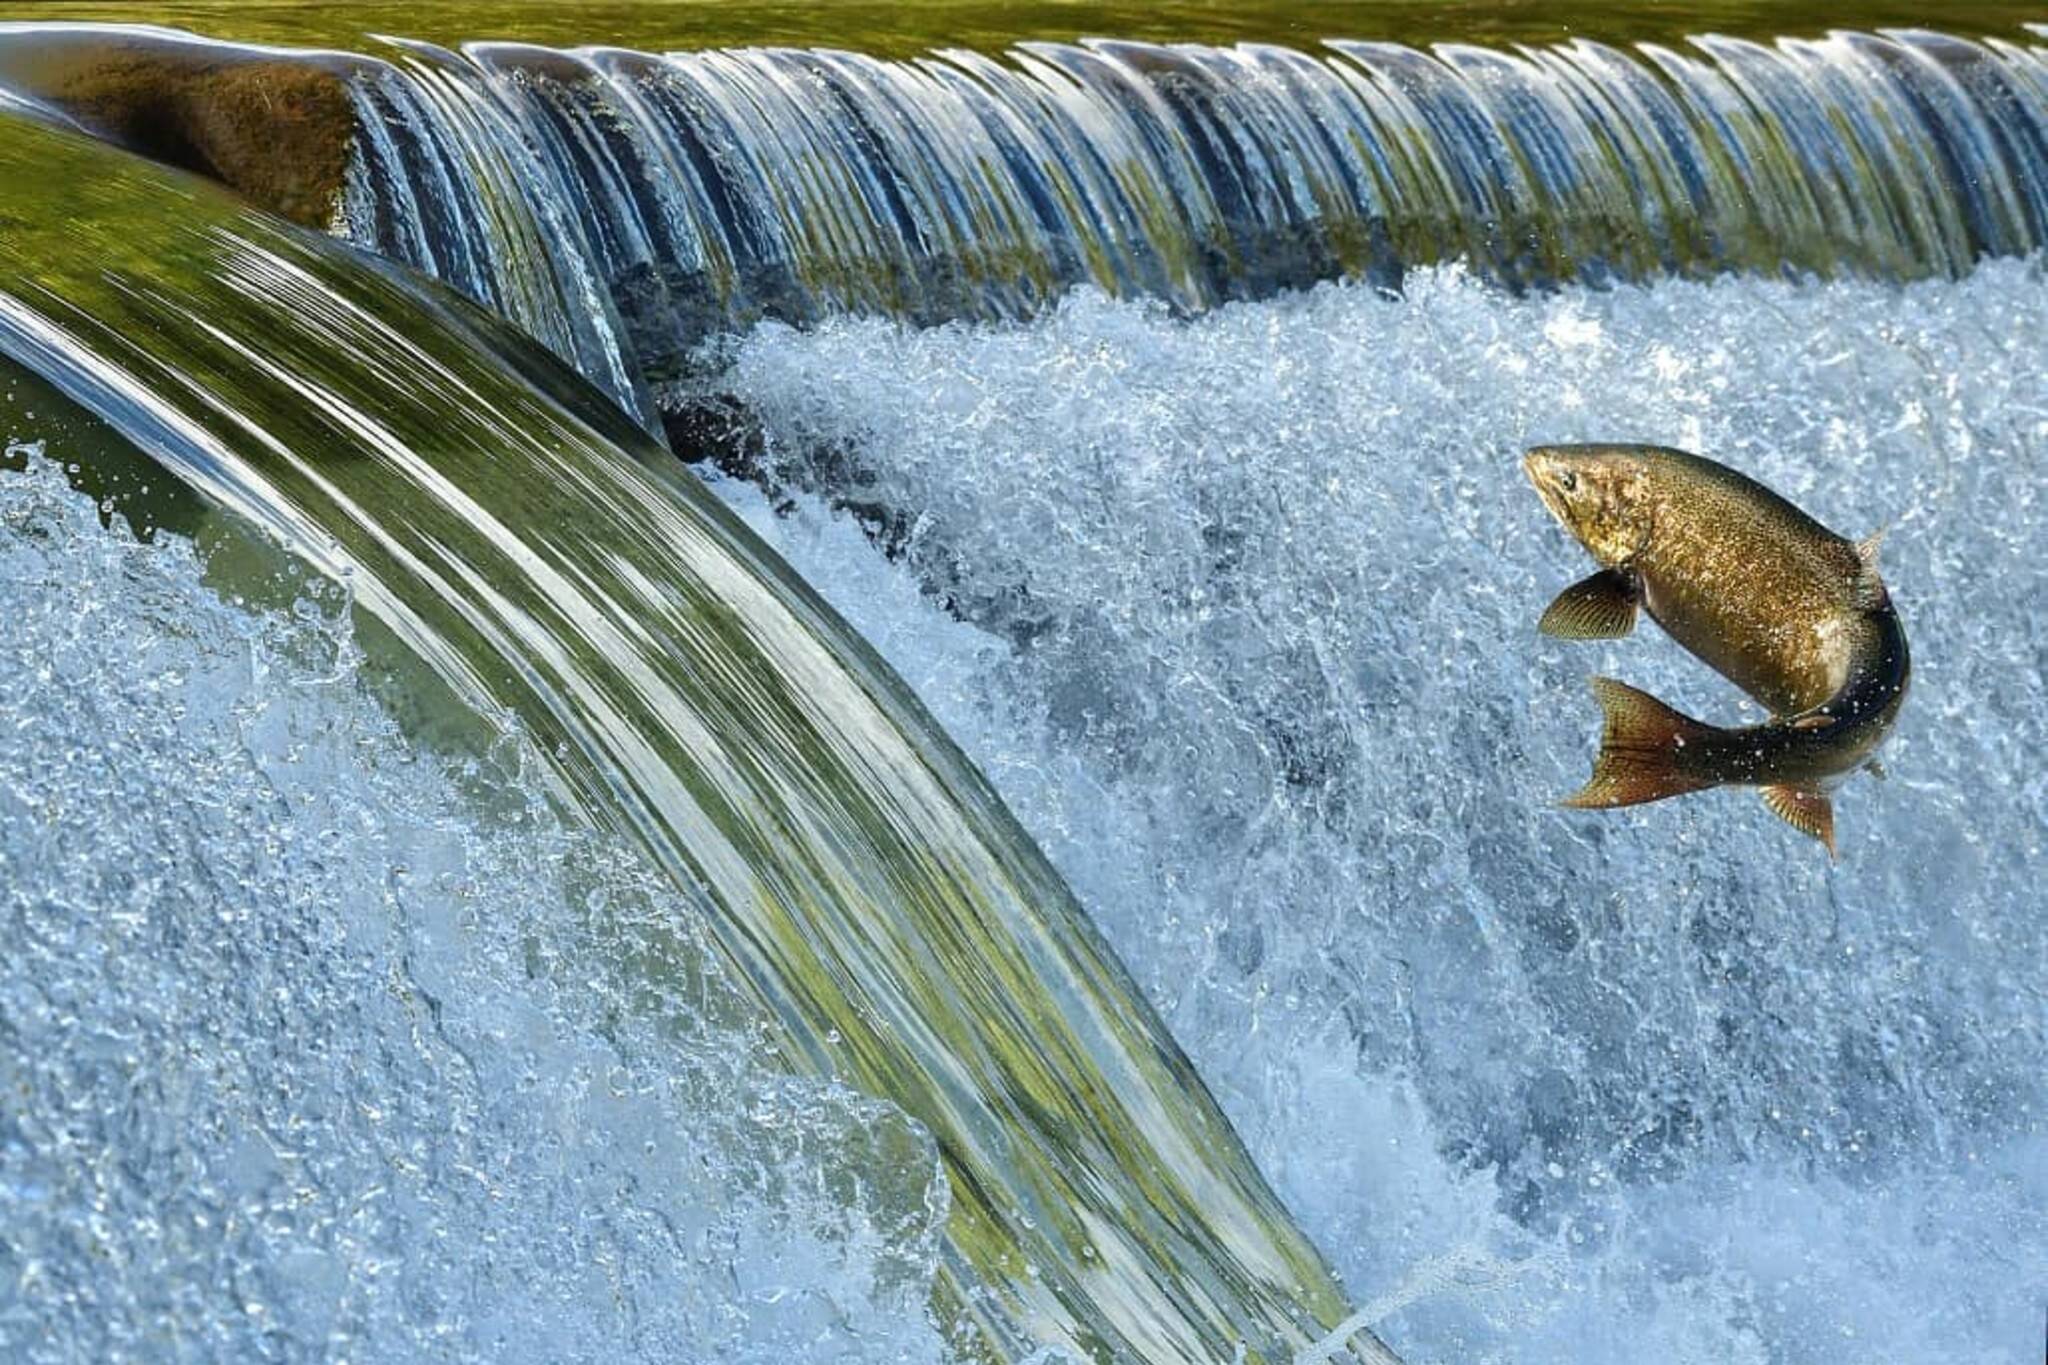 You can see tons of salmon jumping through Toronto's rivers right now